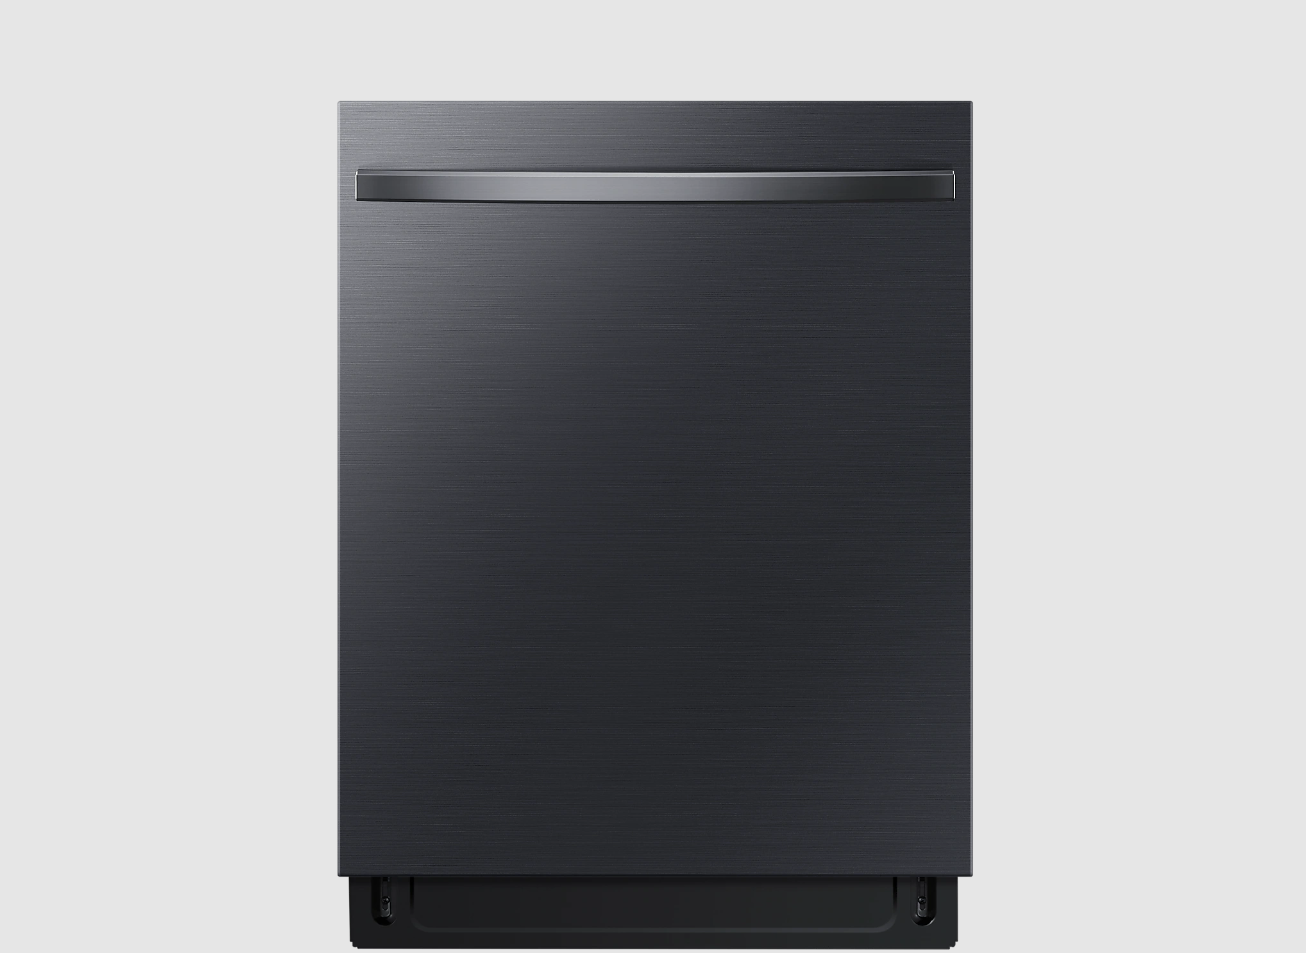 Samsung - 46 dBA Built In Dishwasher in Black Stainless - DW80CG5451MTAA